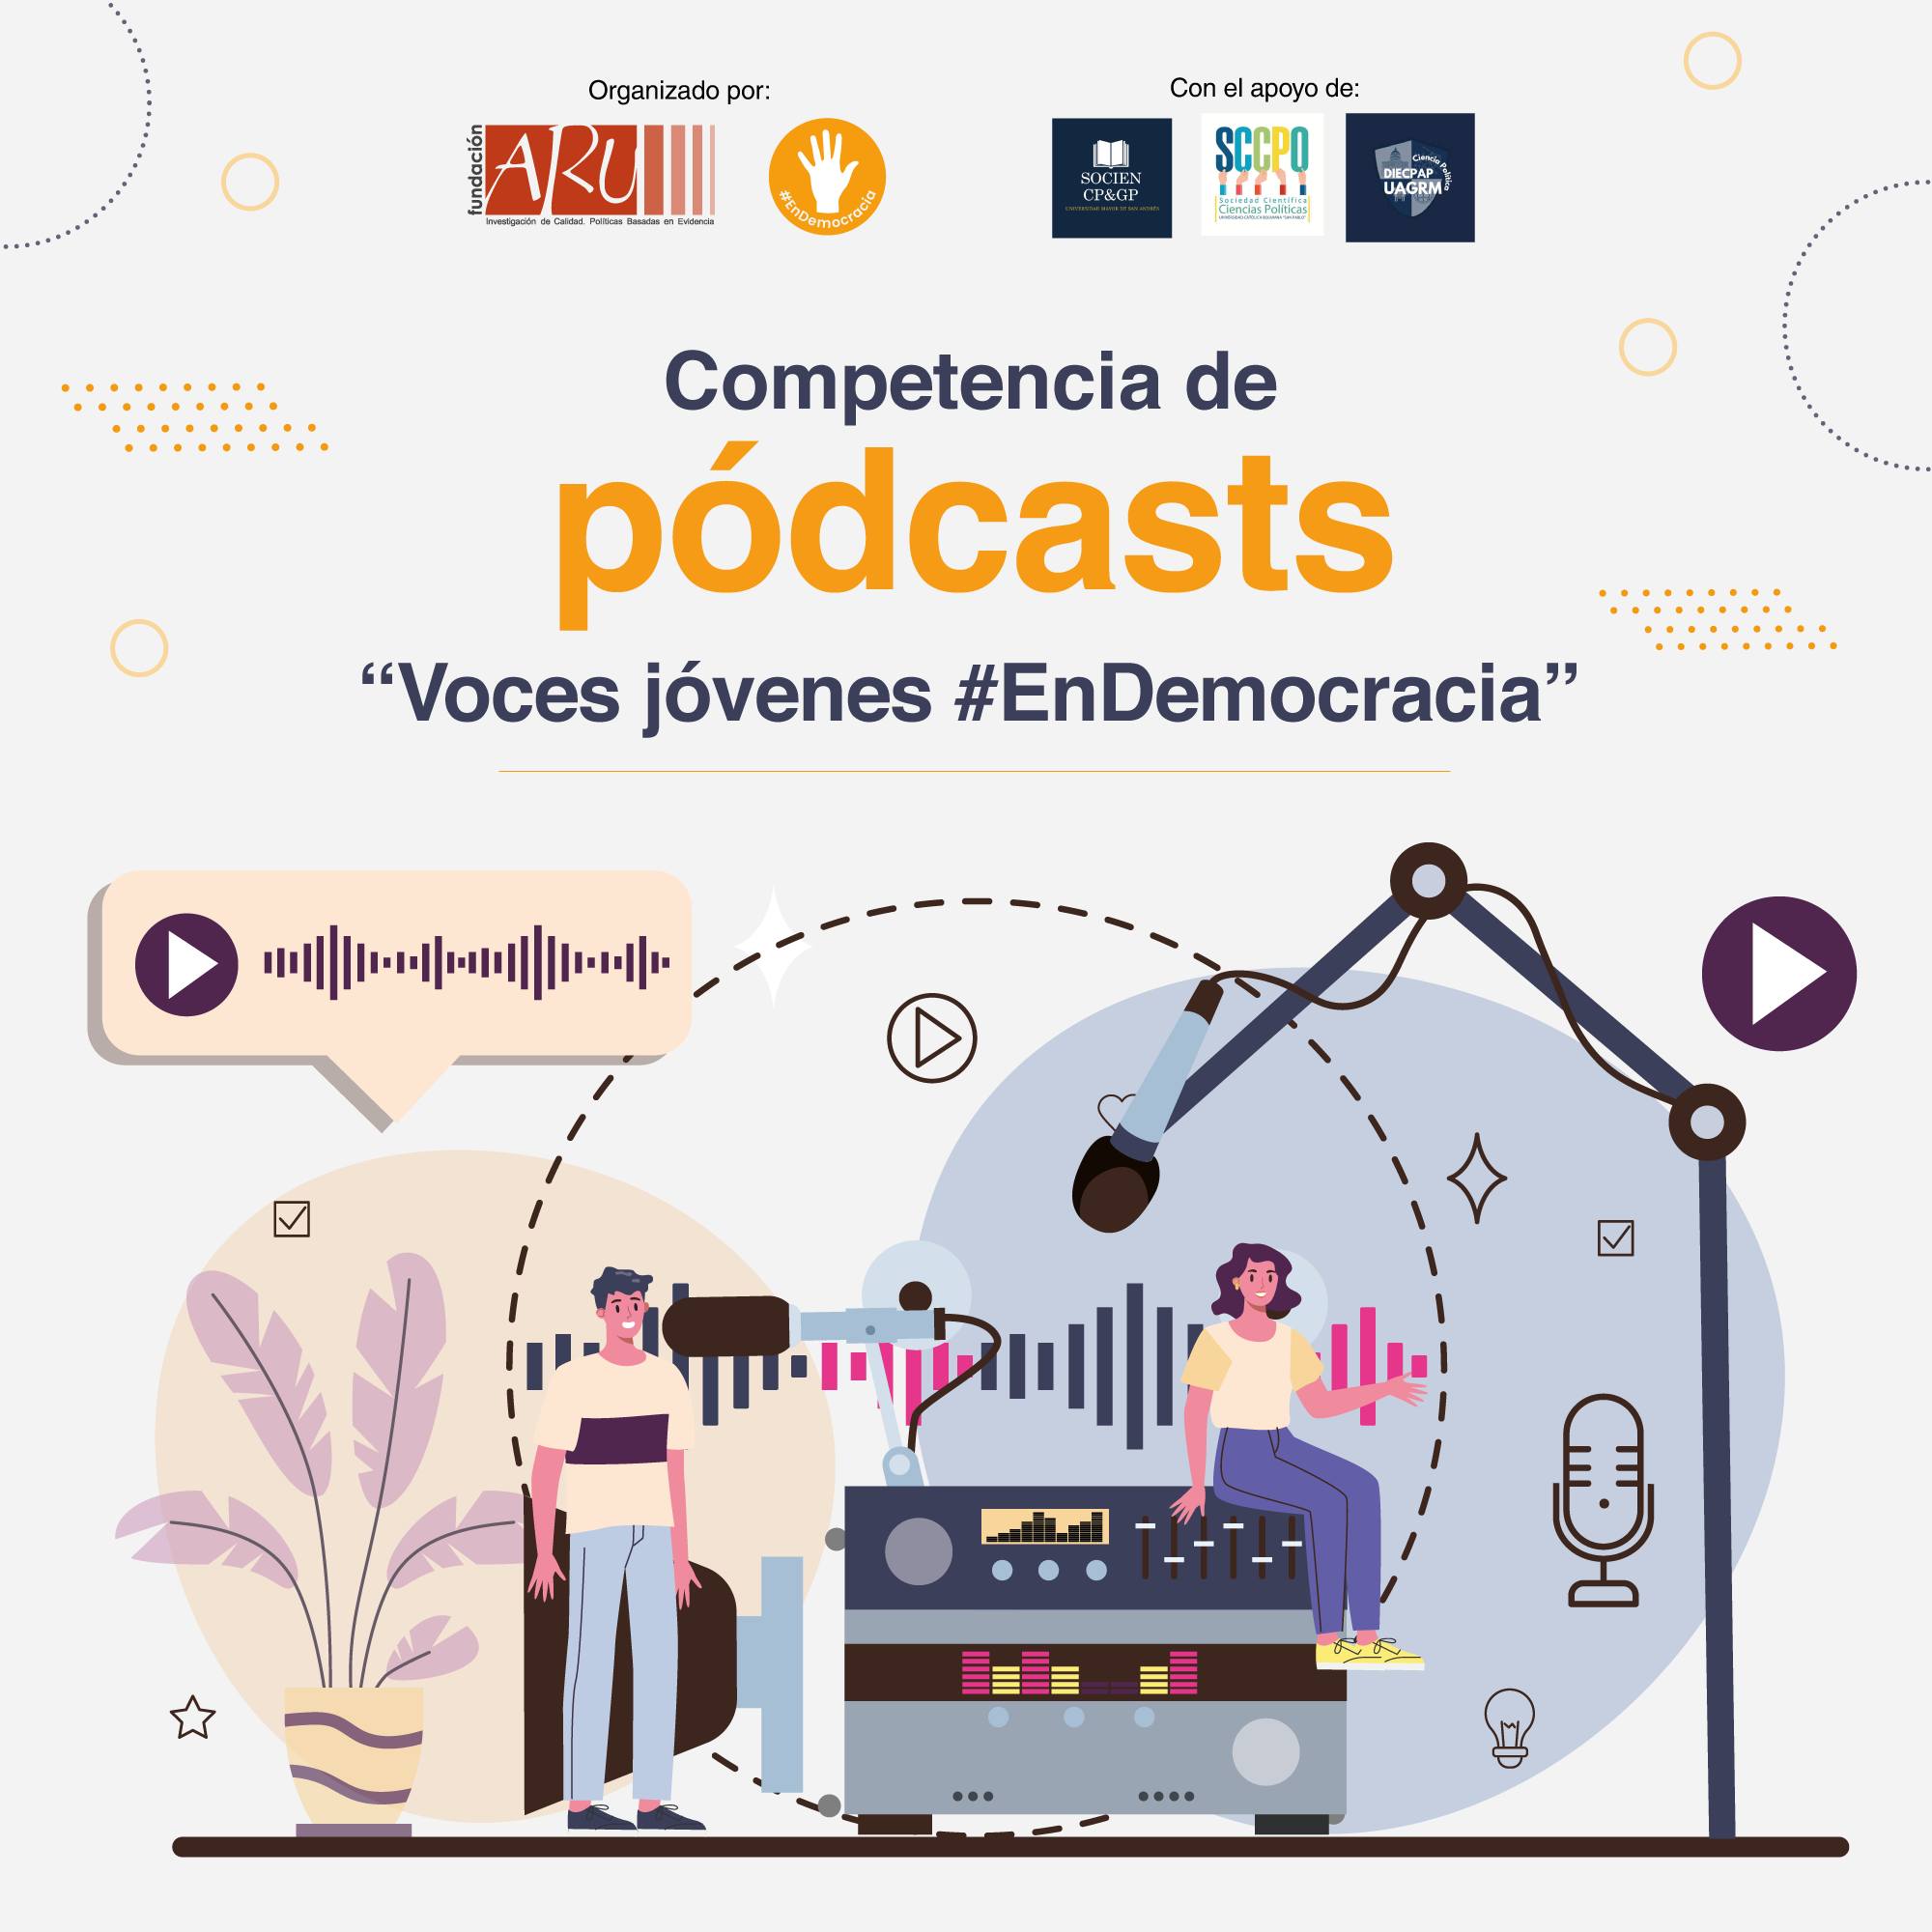 Podcast competition “Young Voices #EnDemocracia”.